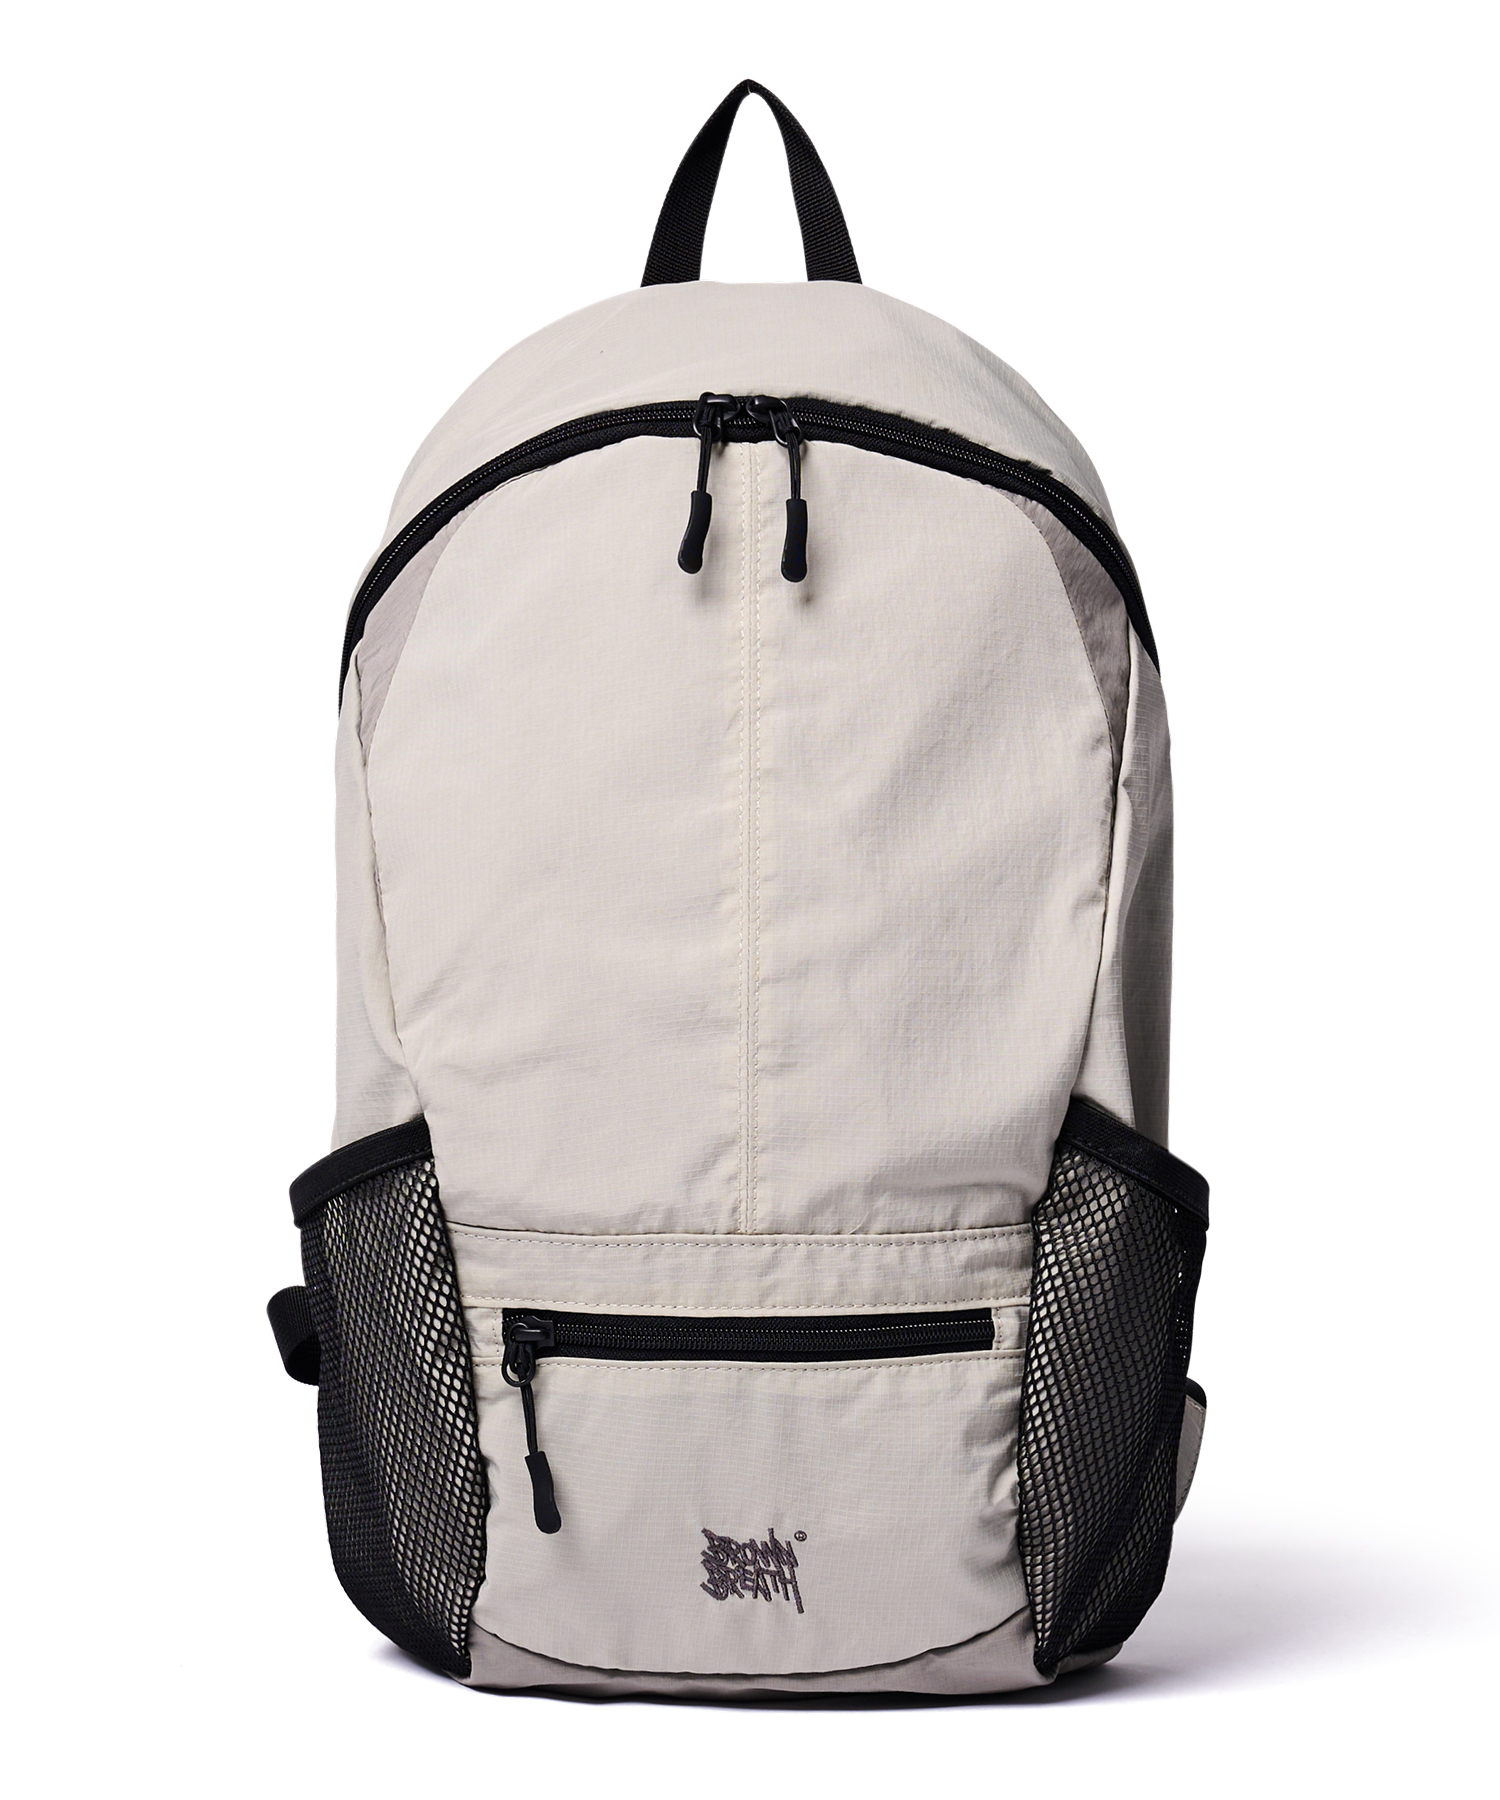 ACTS PACKABLE BACKPACK - GREY